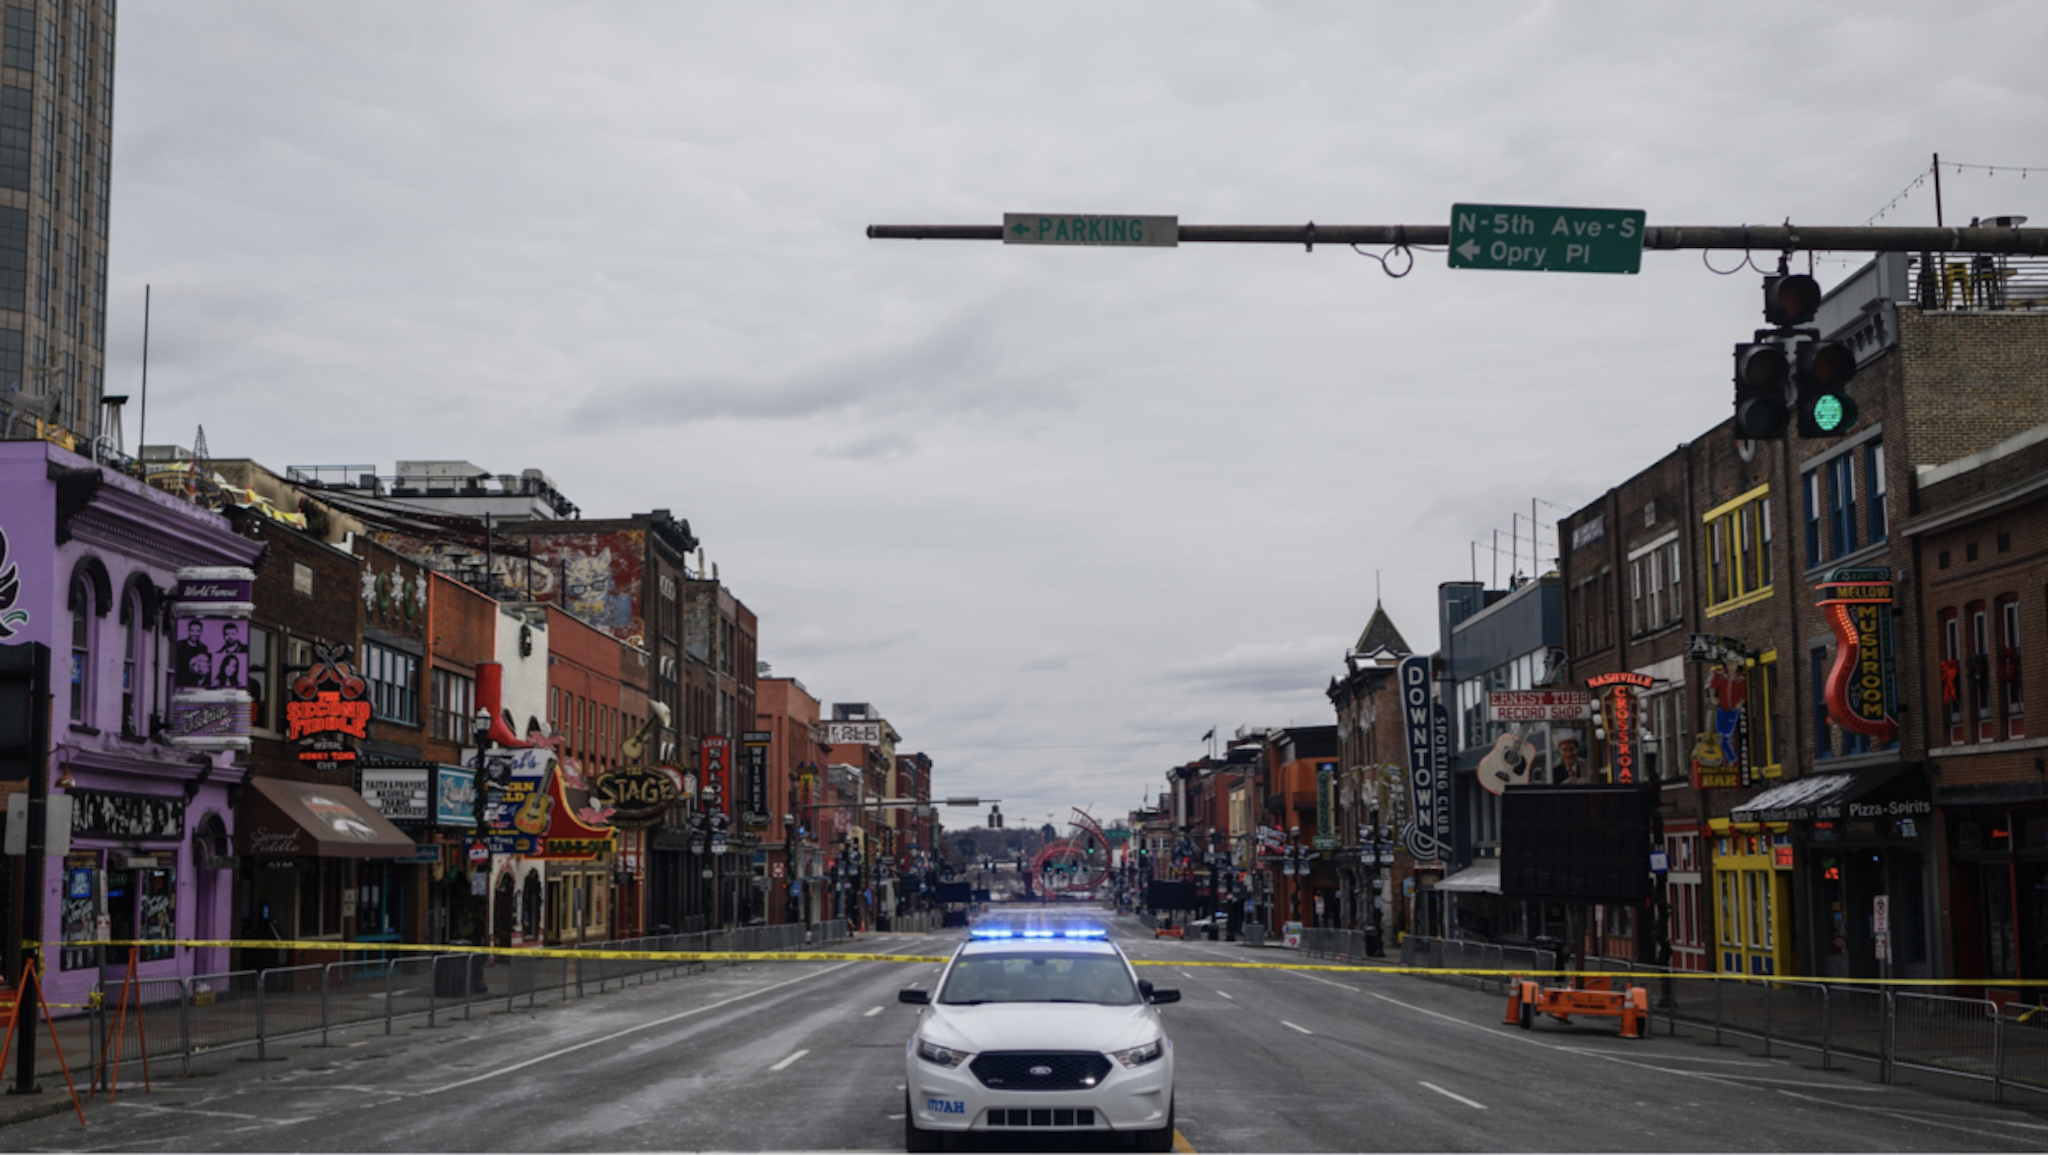 NASHVILLE, Tenn. - Dec.25, 2020: Police block off Nashvilles iconic Broadway while investigating an explosion in downtown Nashville that is believed to be intentional.